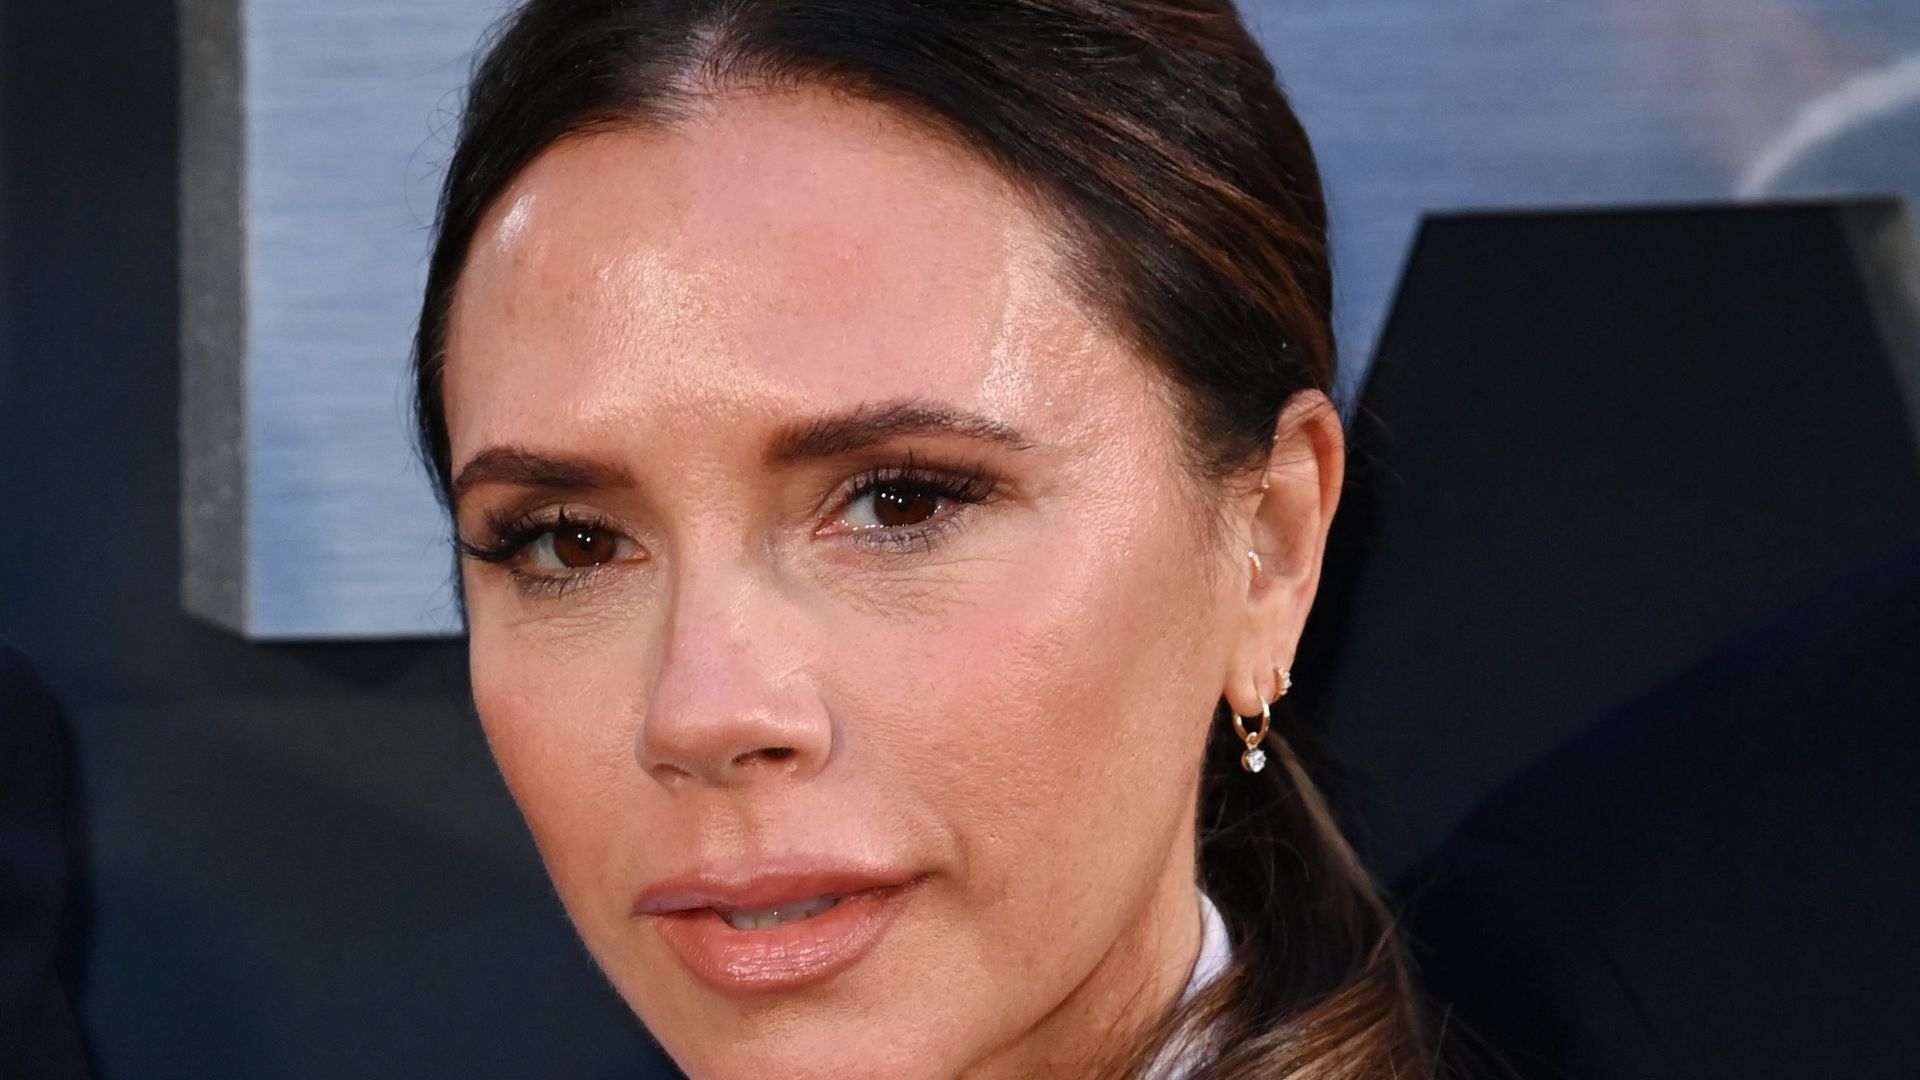 Victoria Beckham's rarely-seen lookalike sister shares incredible photo ...